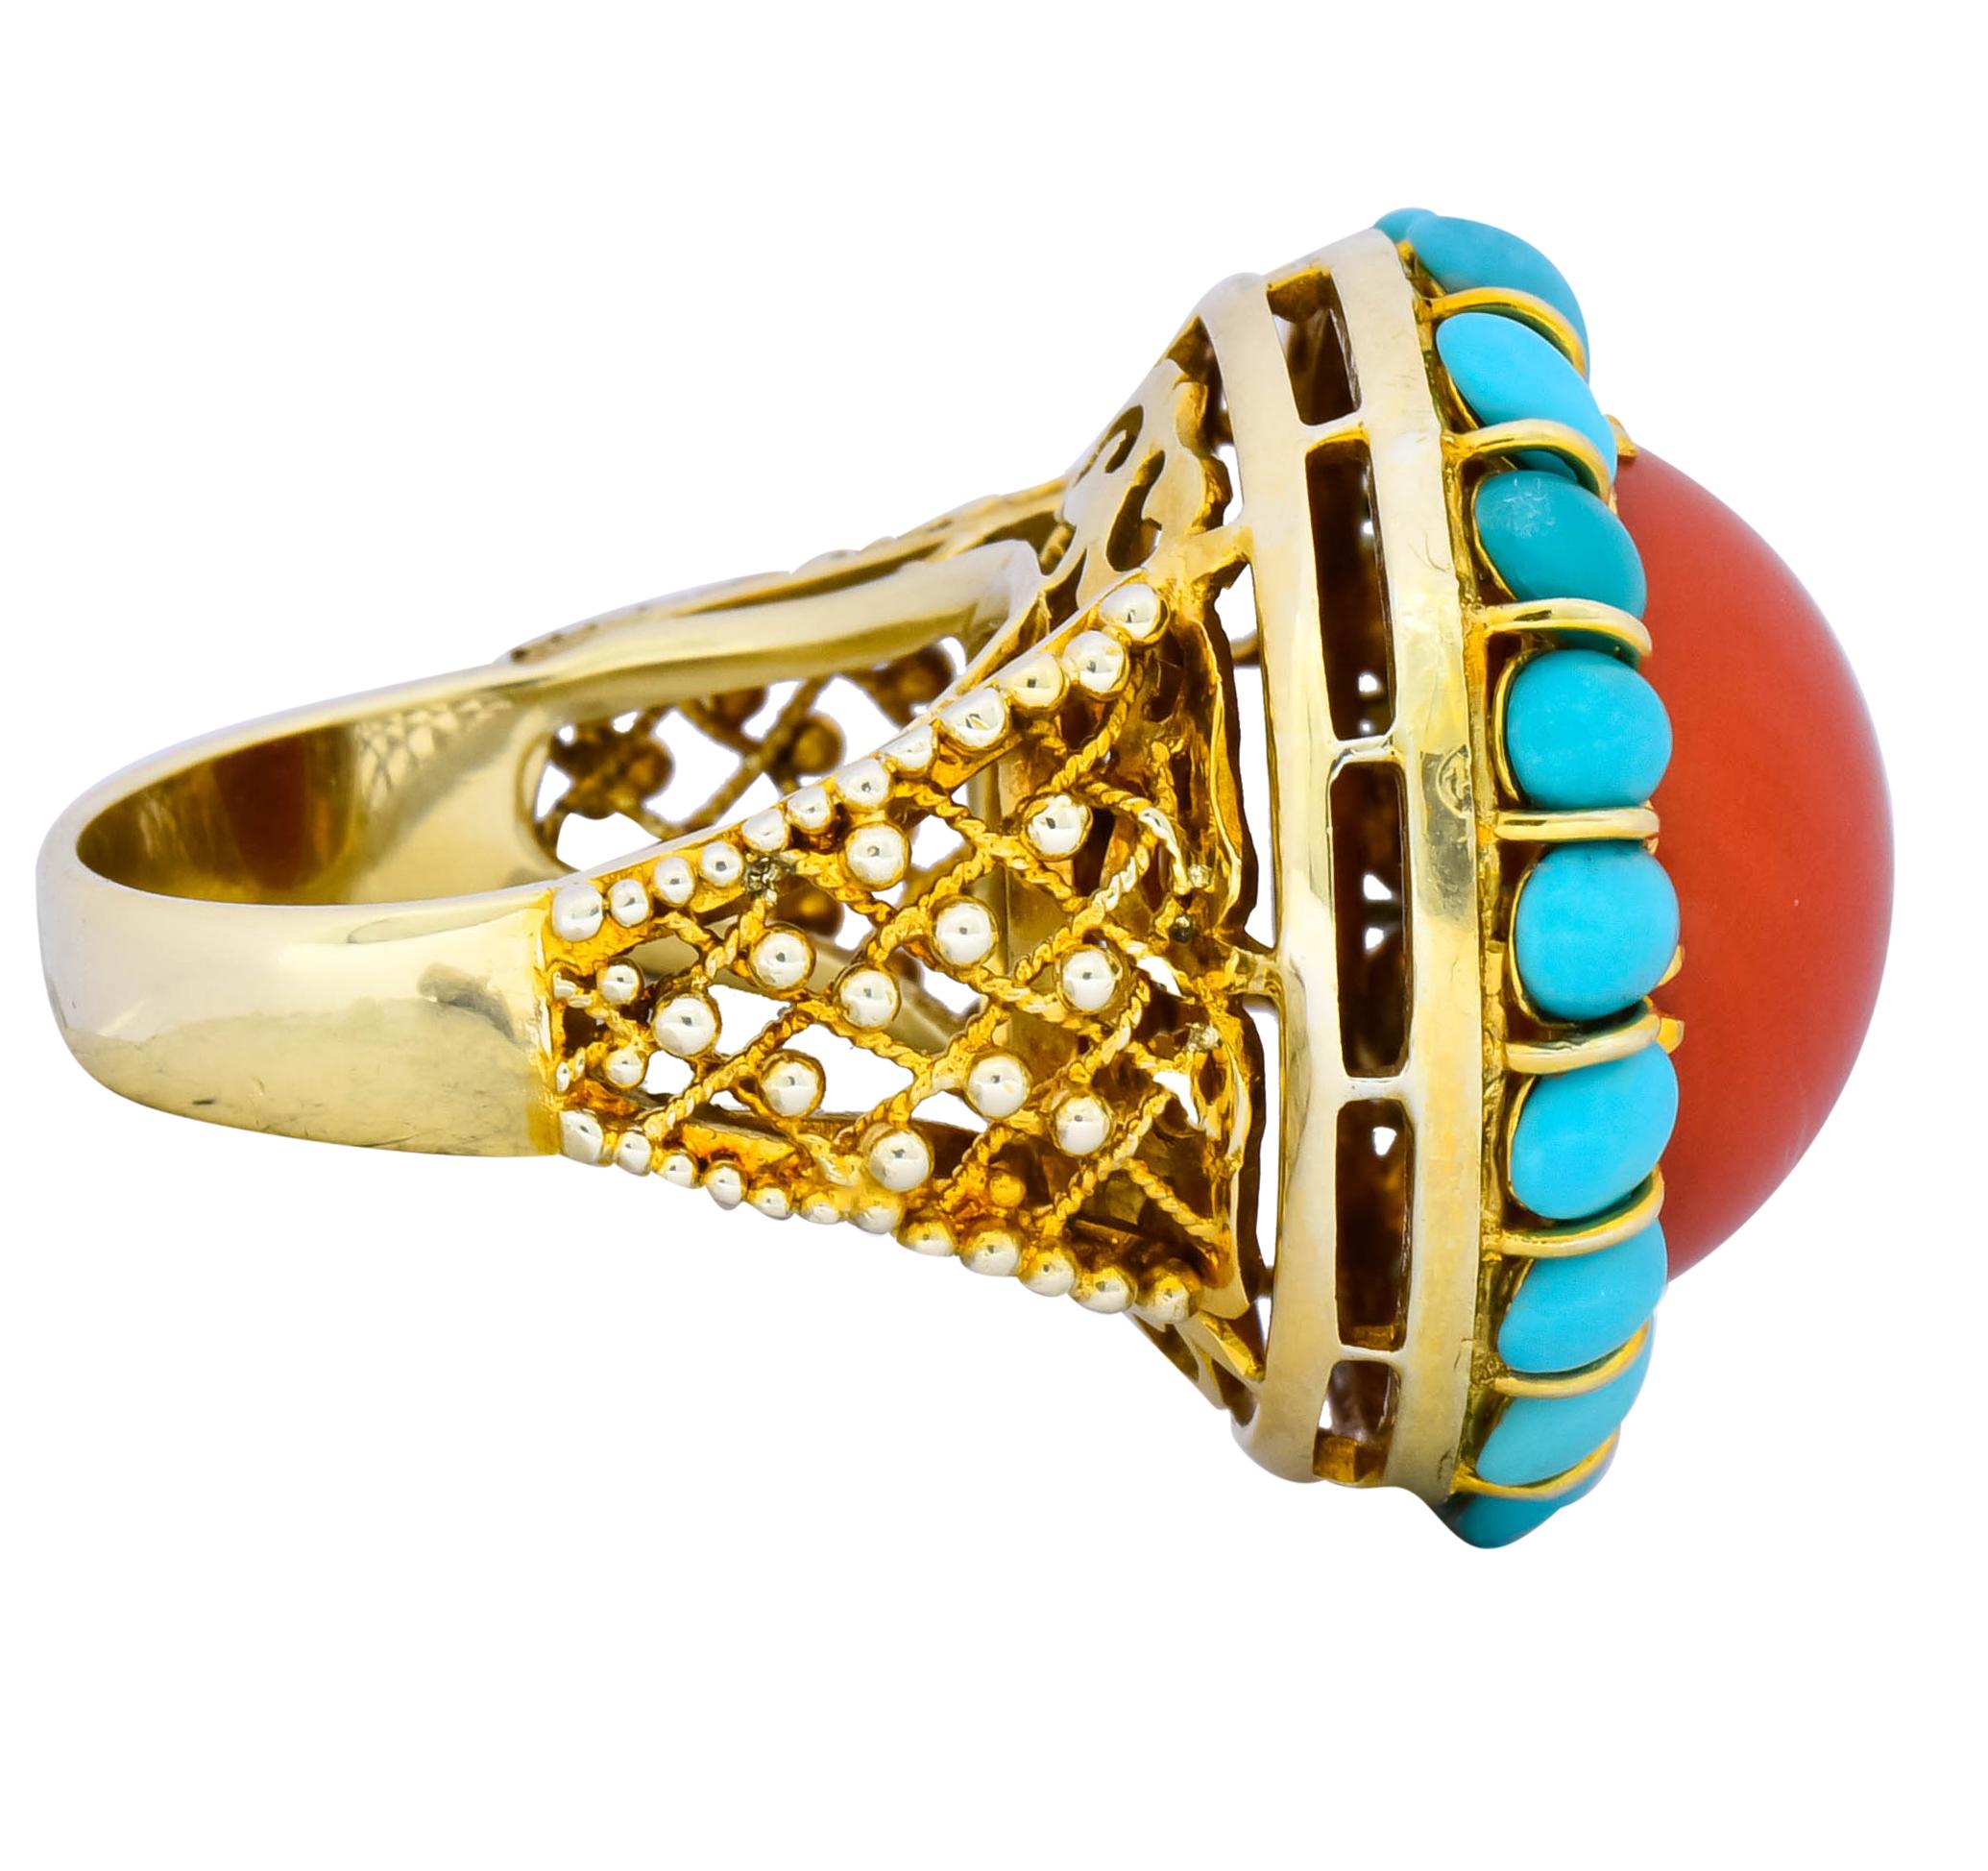 Contemporary Vintage Coral Turquoise 14 Karat Gold Cluster Ring, circa 1960